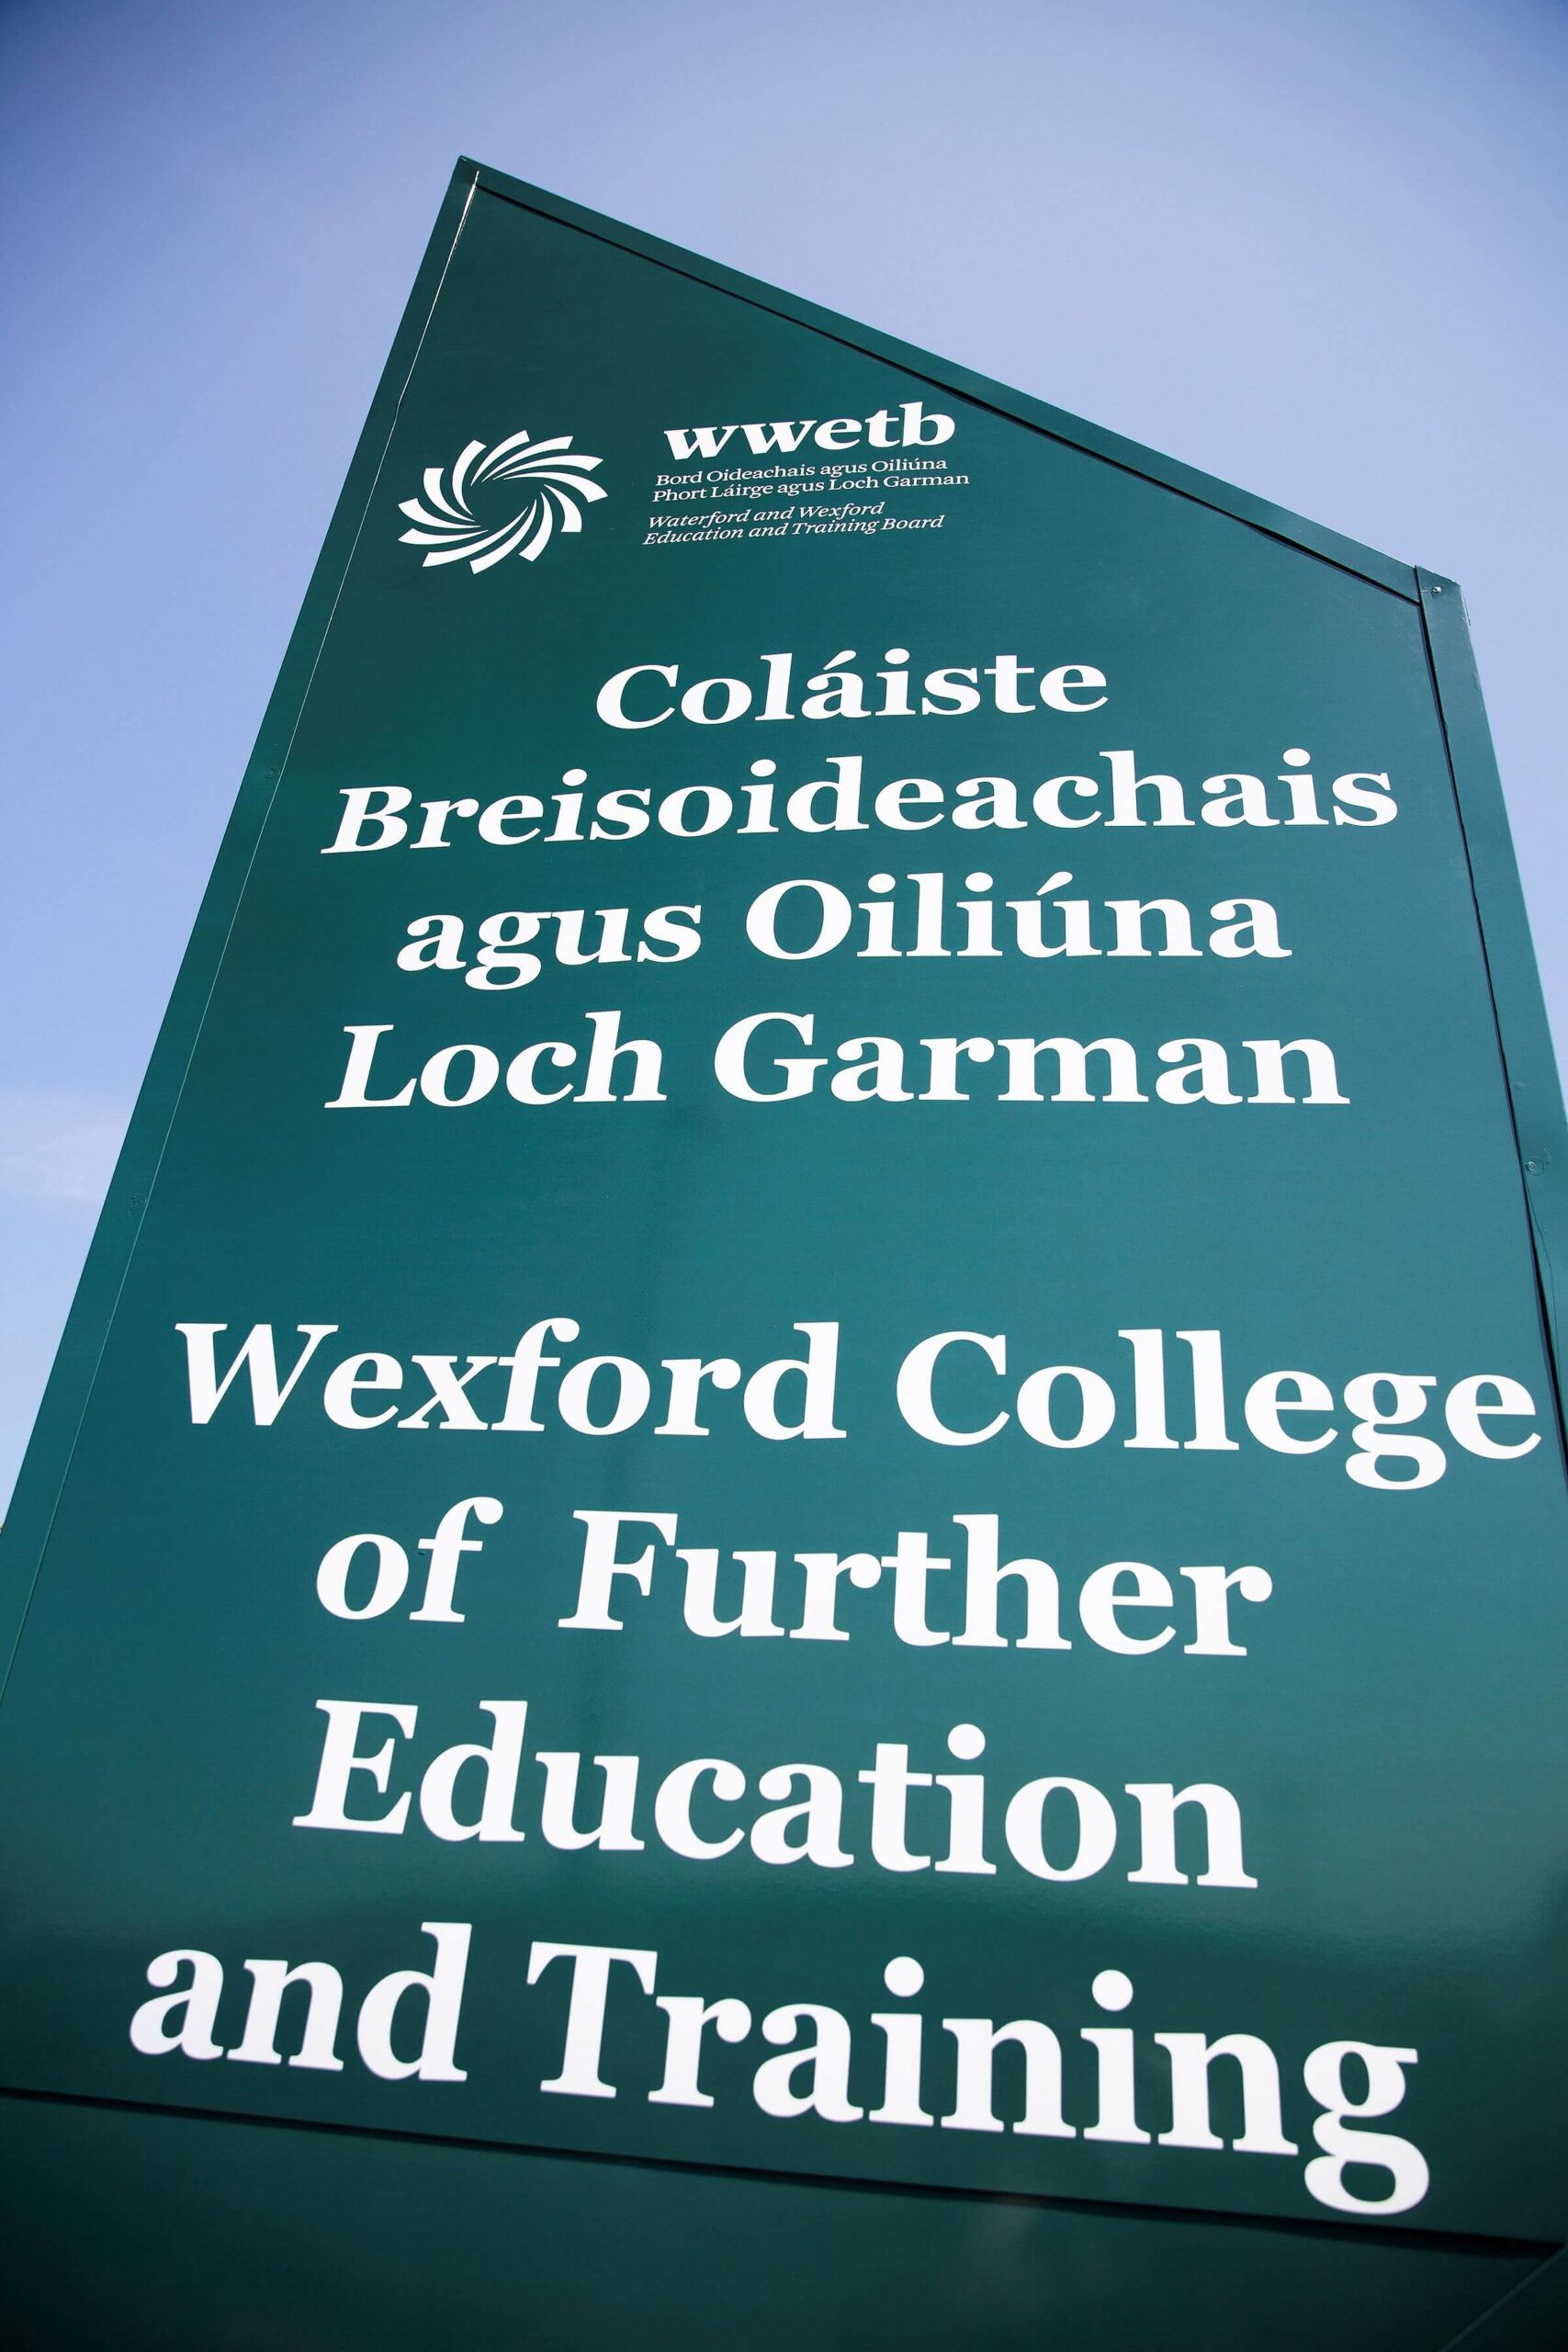 New Wexford College of Further Education and Training